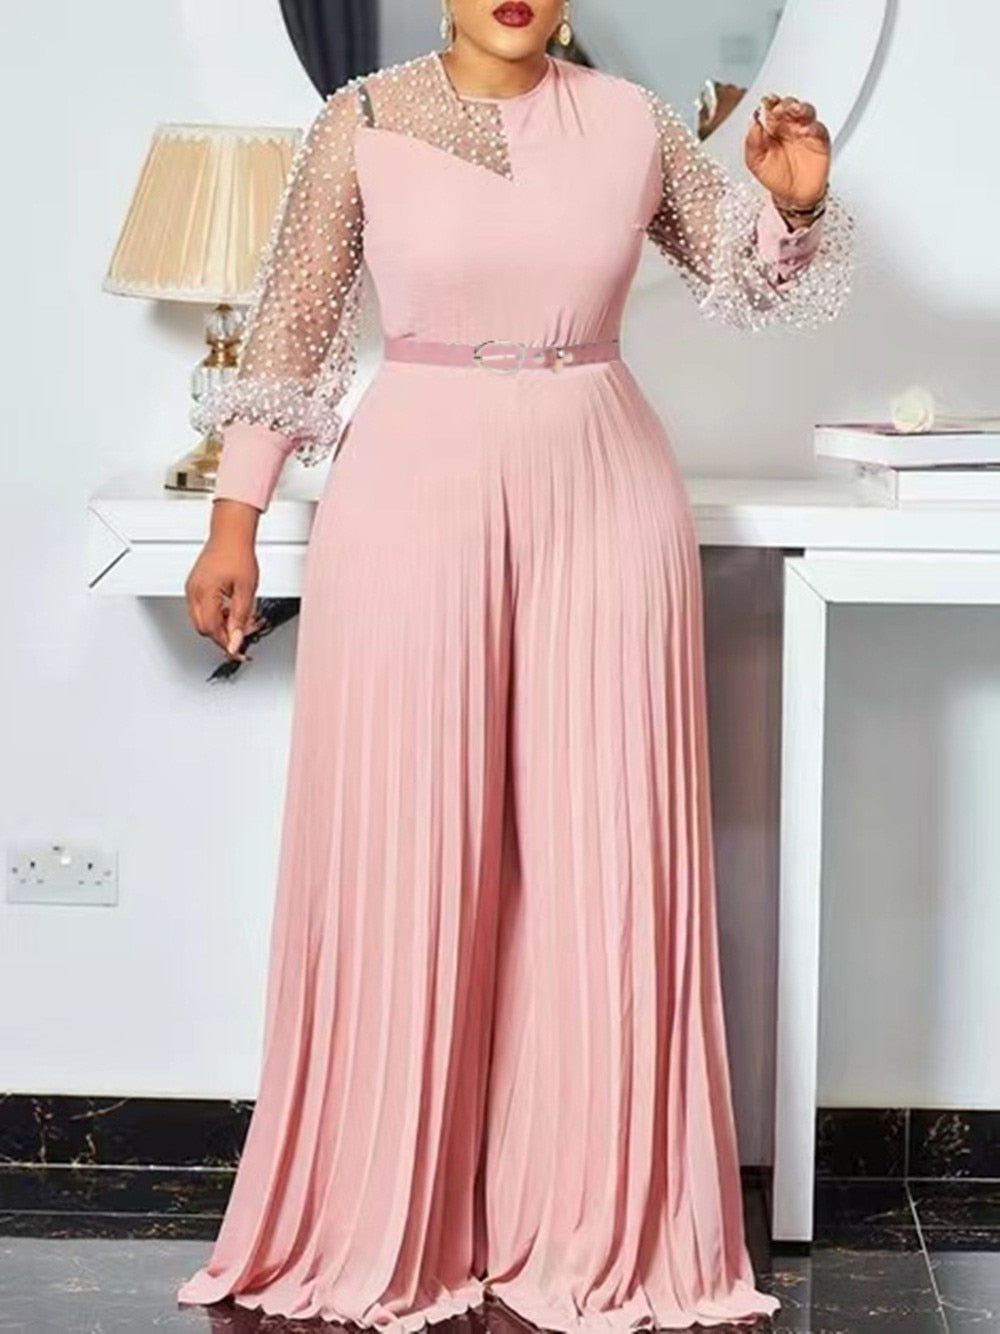 Aovica Plus Fashion S-5xl Fall Outfits Women Pink Fashion Plus Size Jumpsuit Slim Pleated Long Sleeve Rompers Elegant Clothes Wholesale